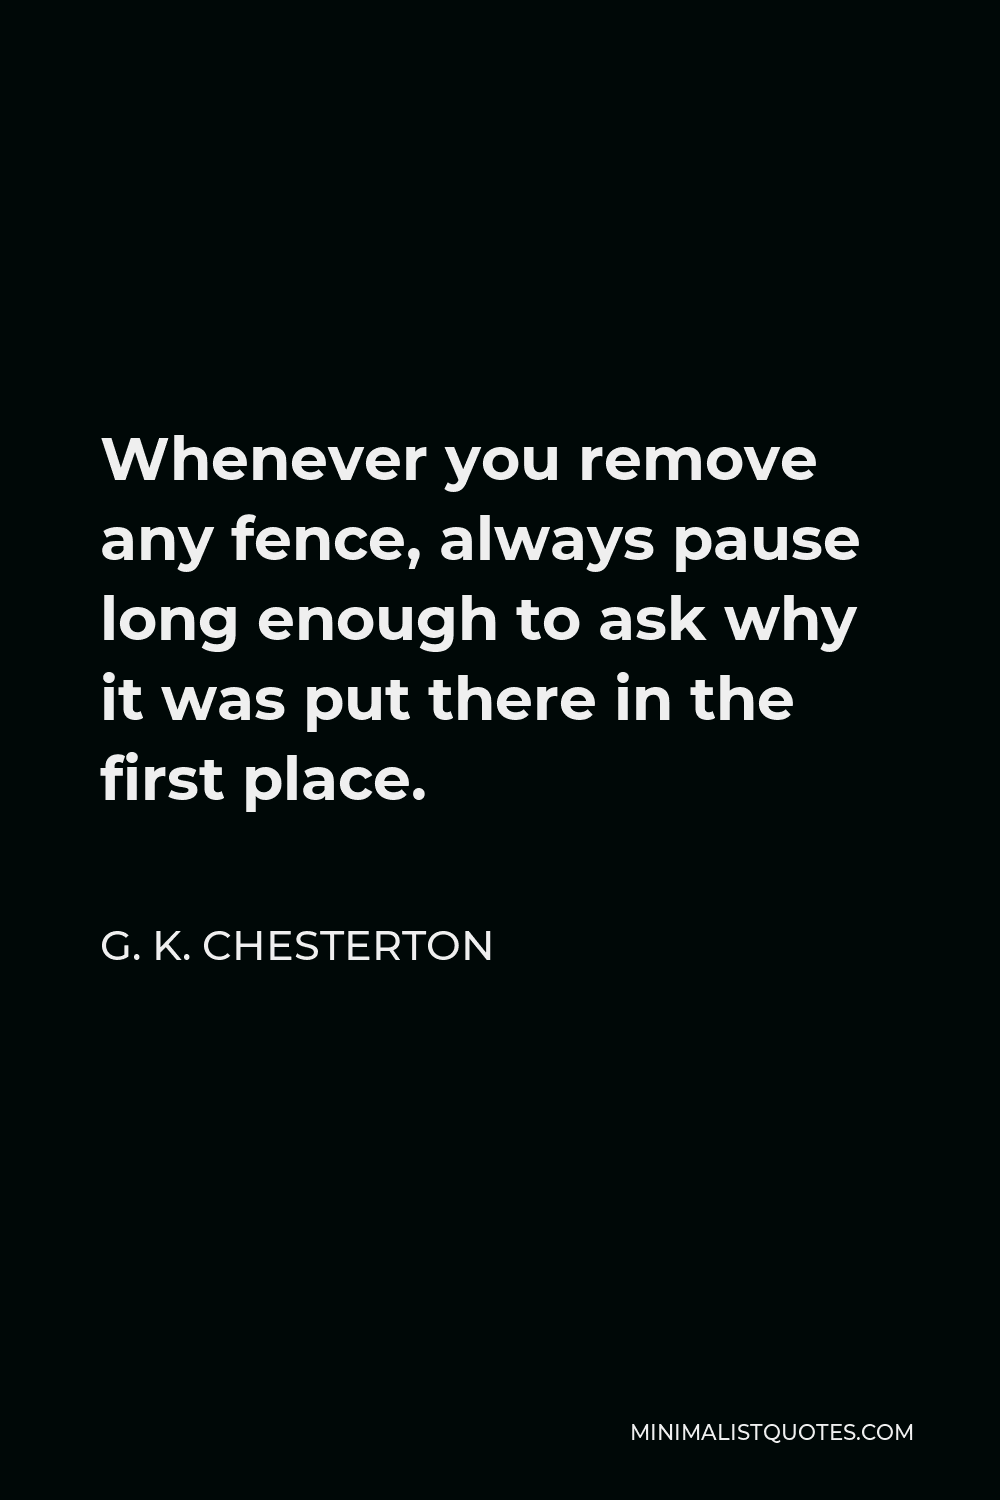 G. K. Chesterton Quote - Whenever you remove any fence, always pause long enough to ask why it was put there in the first place.